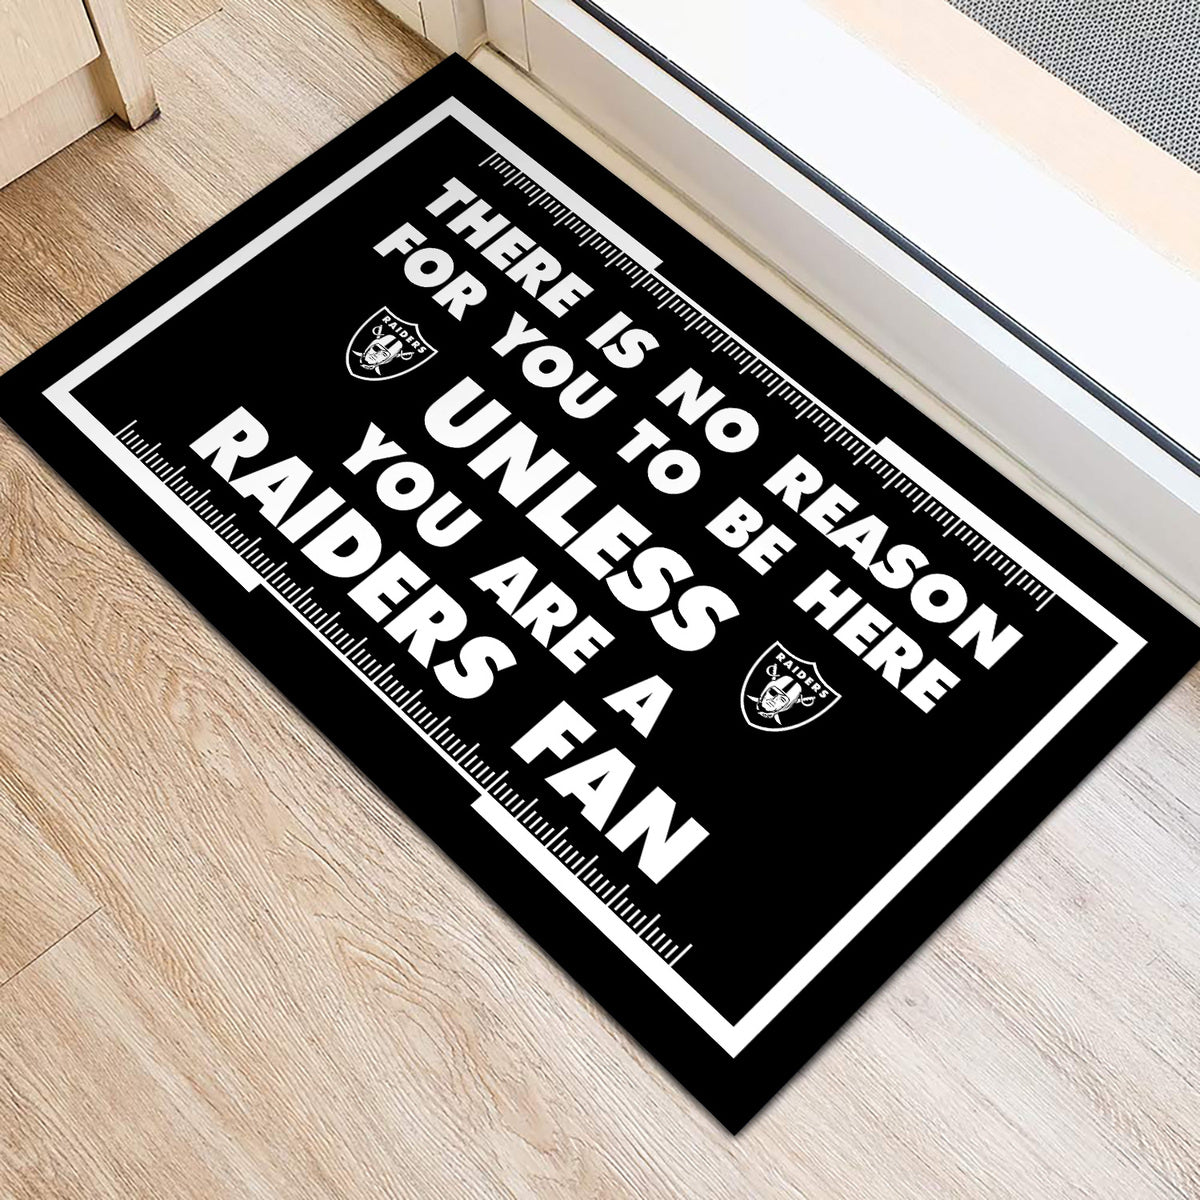 There Is No Reason For You To Be Here - Las Vegas RD - Anti Slip Doormat